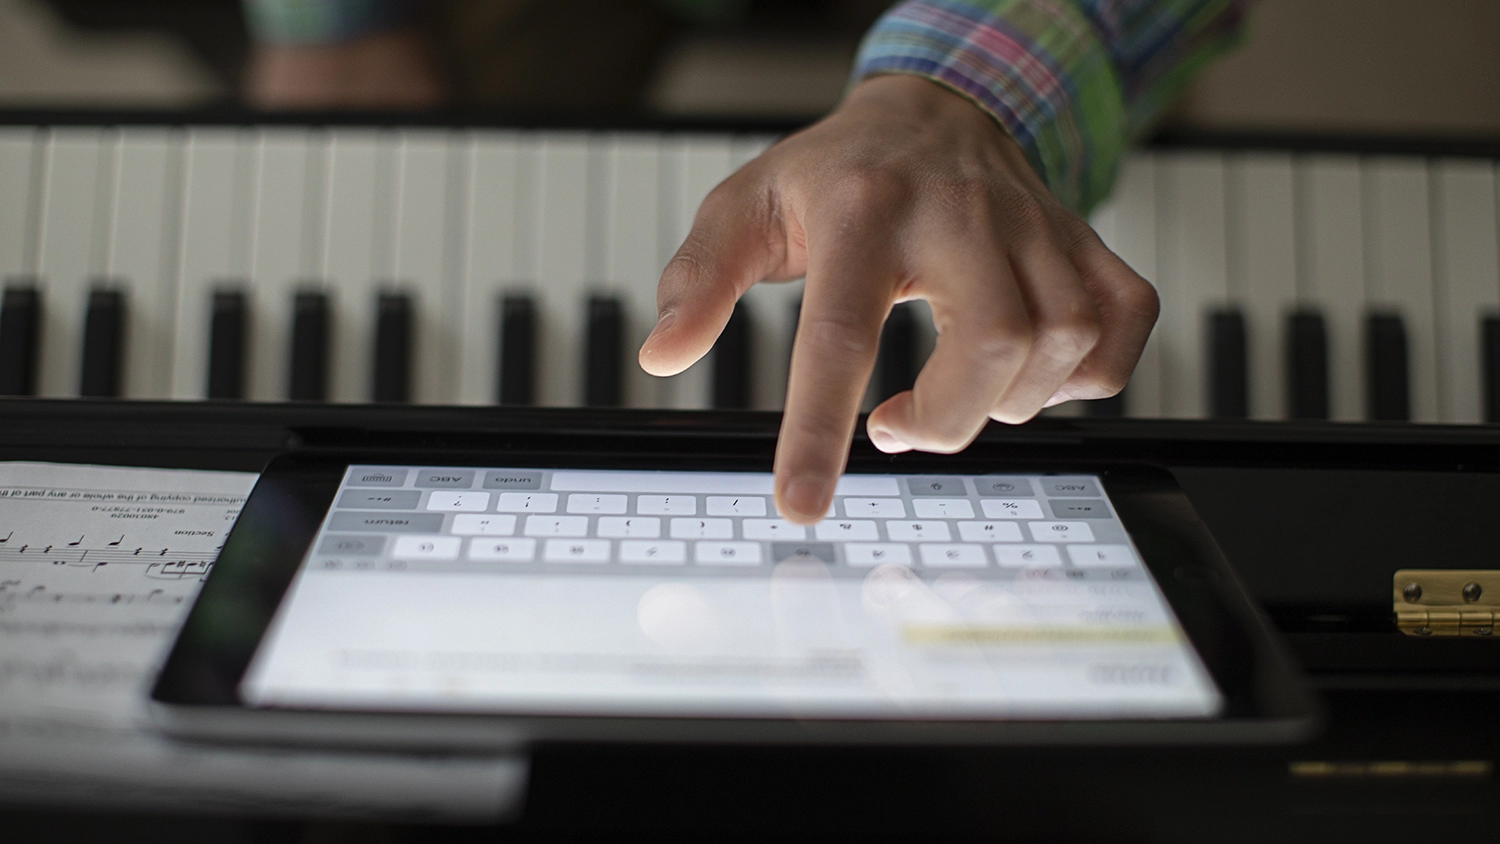 A child's hand types on an iPad that is propped up in front of a musical keyboard and sheet music.